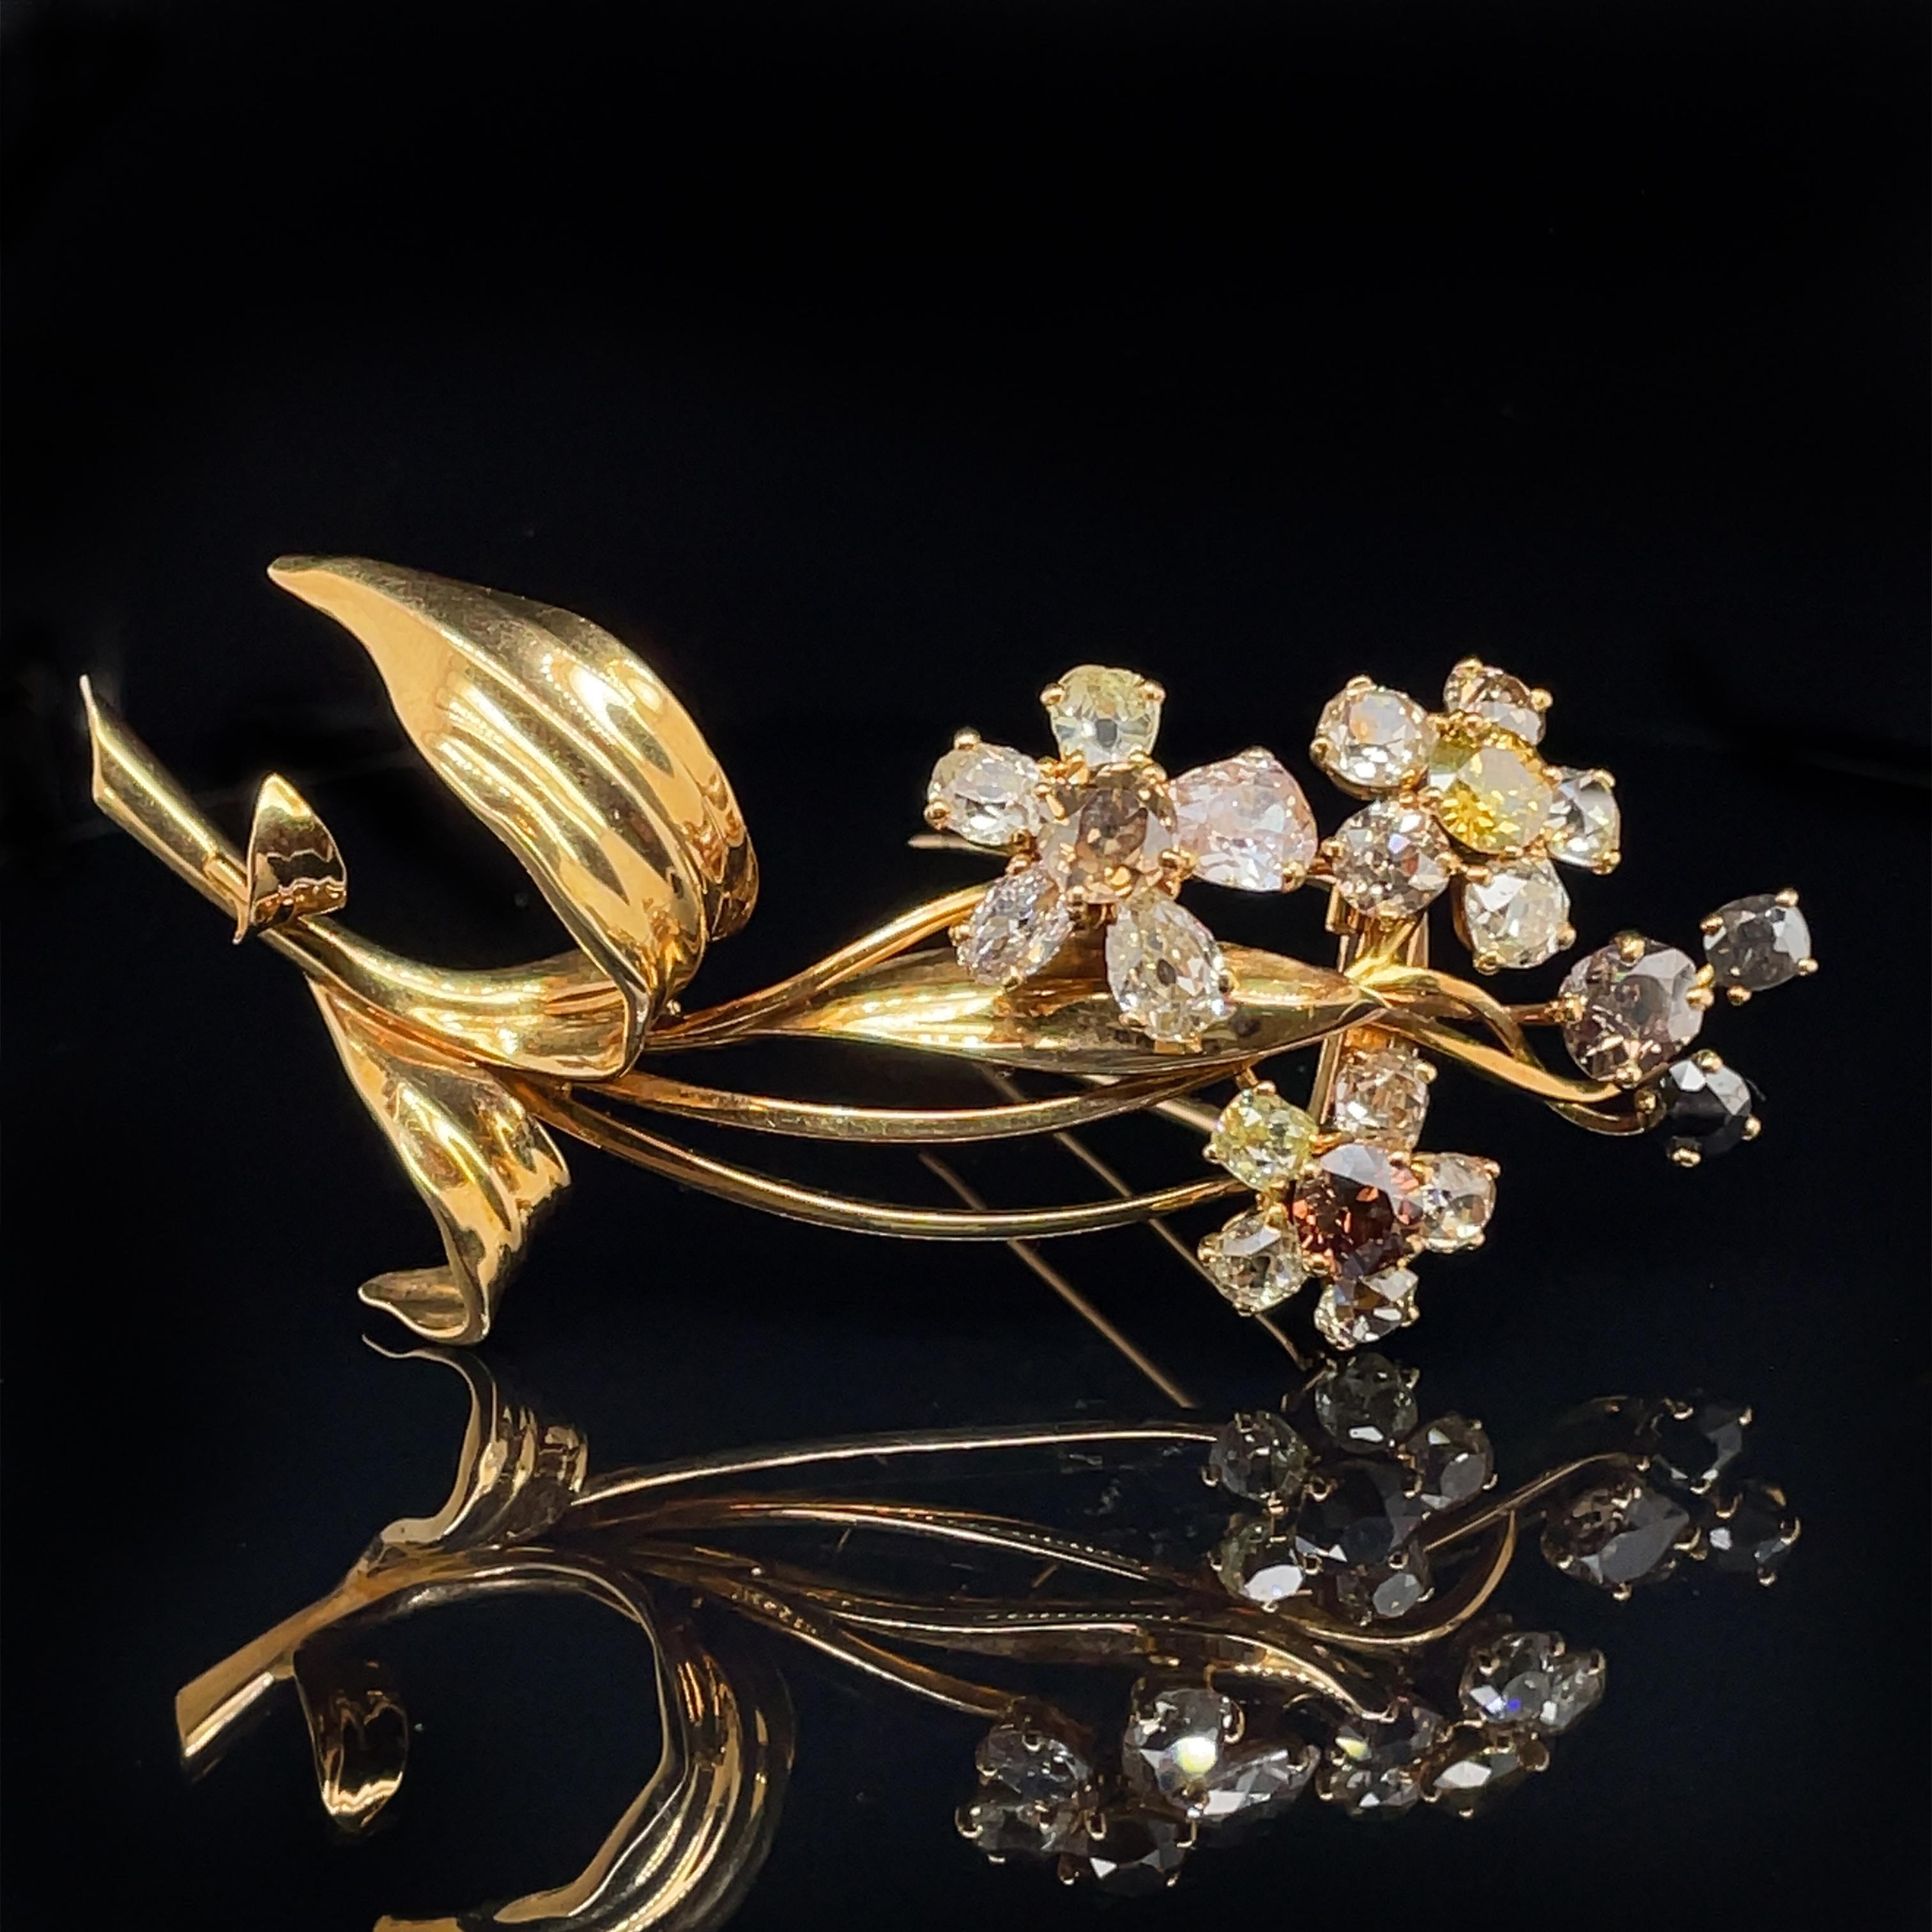 Retro Cartier Multi-Colored Old-Cut Diamond Flower Brooch, ca. 1940s

A beautiful naturalistic flower brooch by Cartier Paris from the 1940s. The flowers are blossoming with very enchanting old-cut, old-mine and pear-shaped diamonds in various